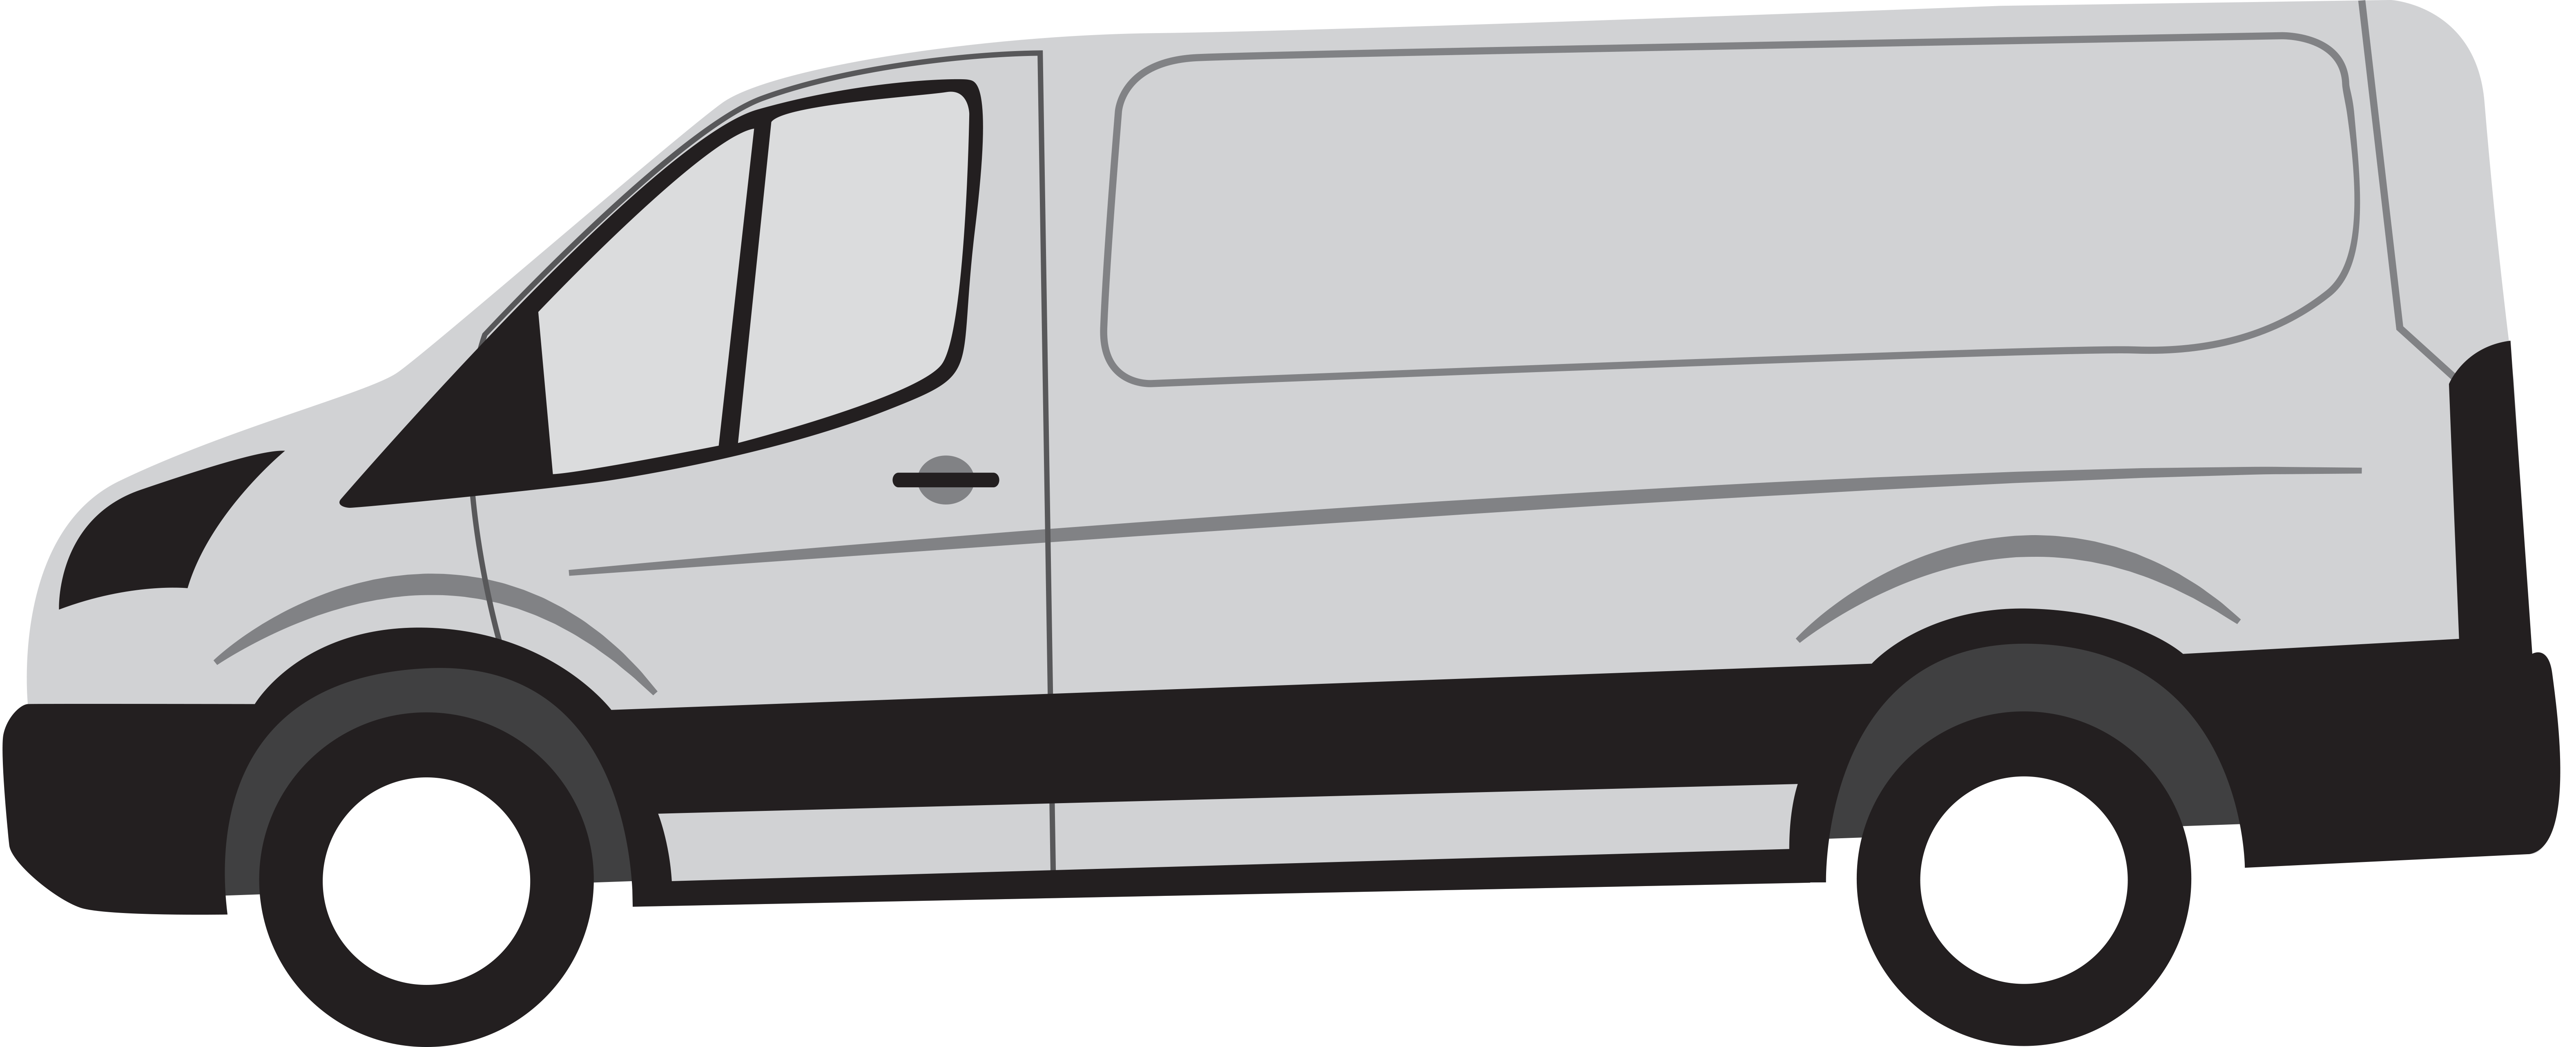 130WB Low Roof COMMERCIAL VAN EQUIPMENT FOR FORD TRANSIT CARGO VANS